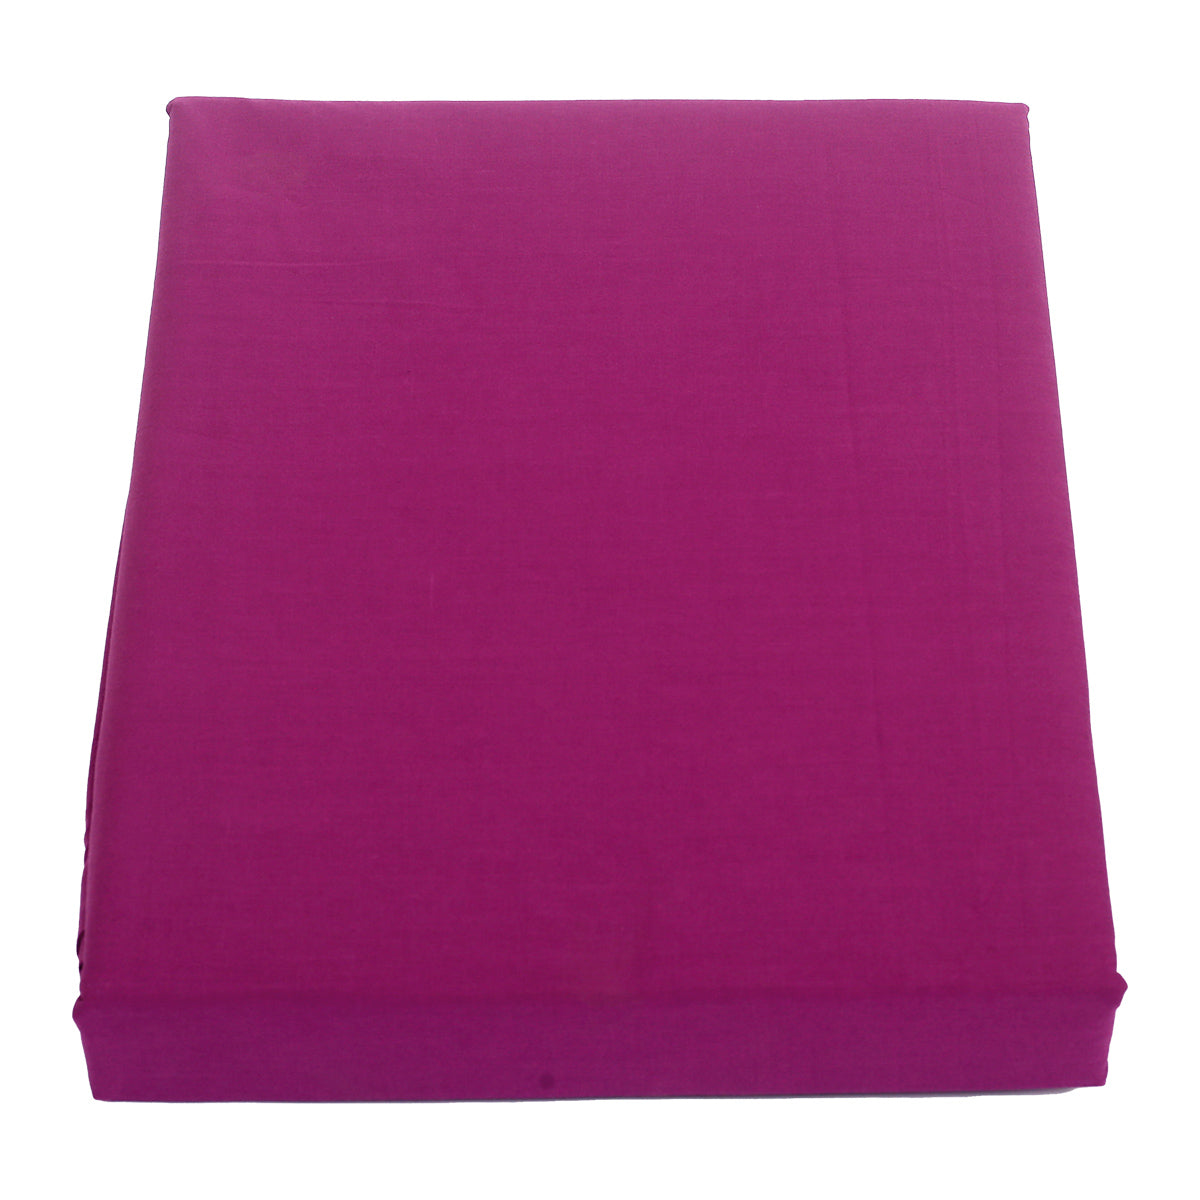 PlumP Double Bed Sheet 96x102"